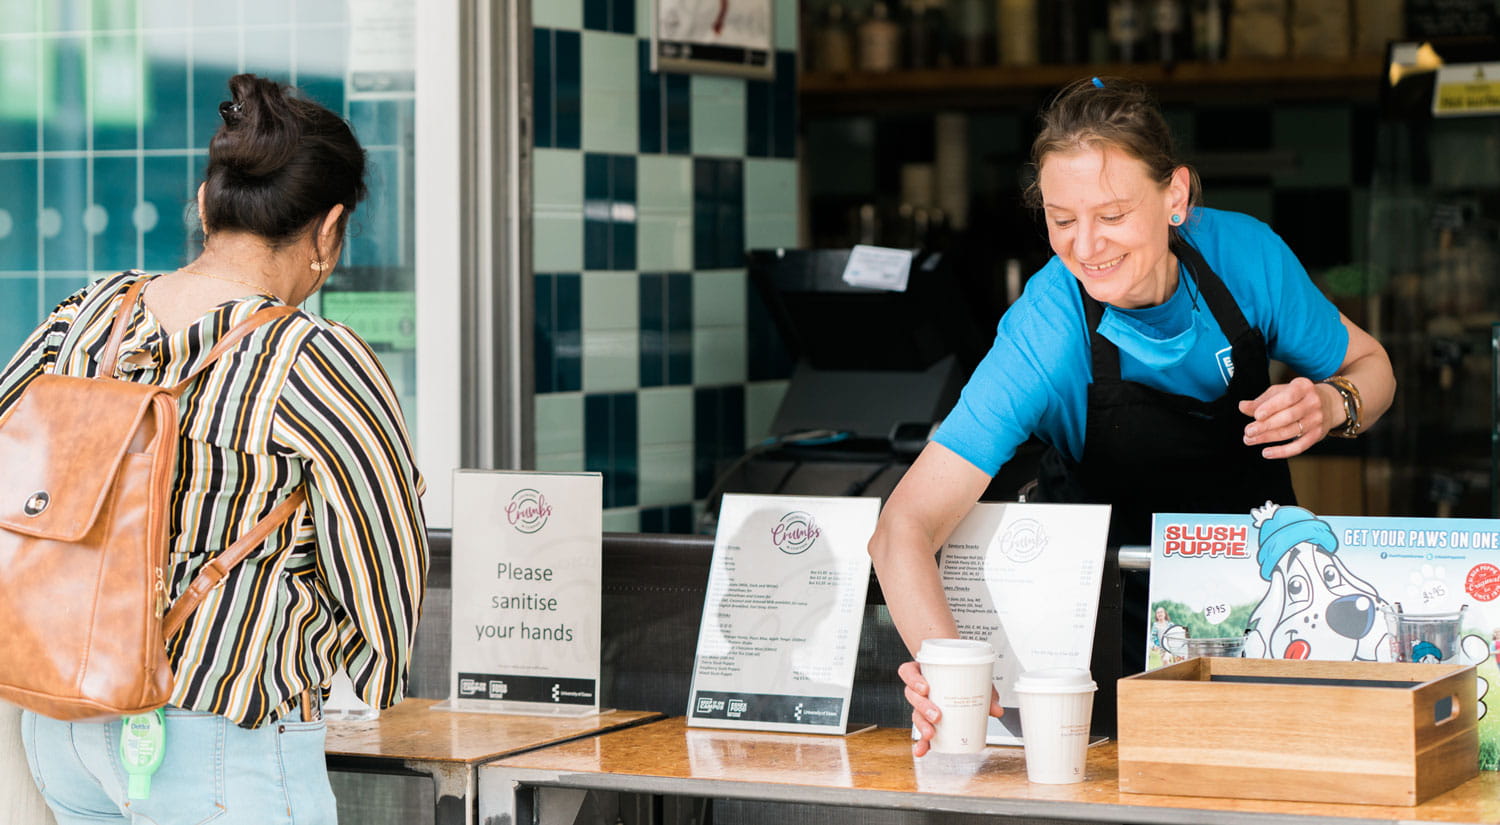 Colleagues in Crumbs coffee shop serving customers on Colchester Campus